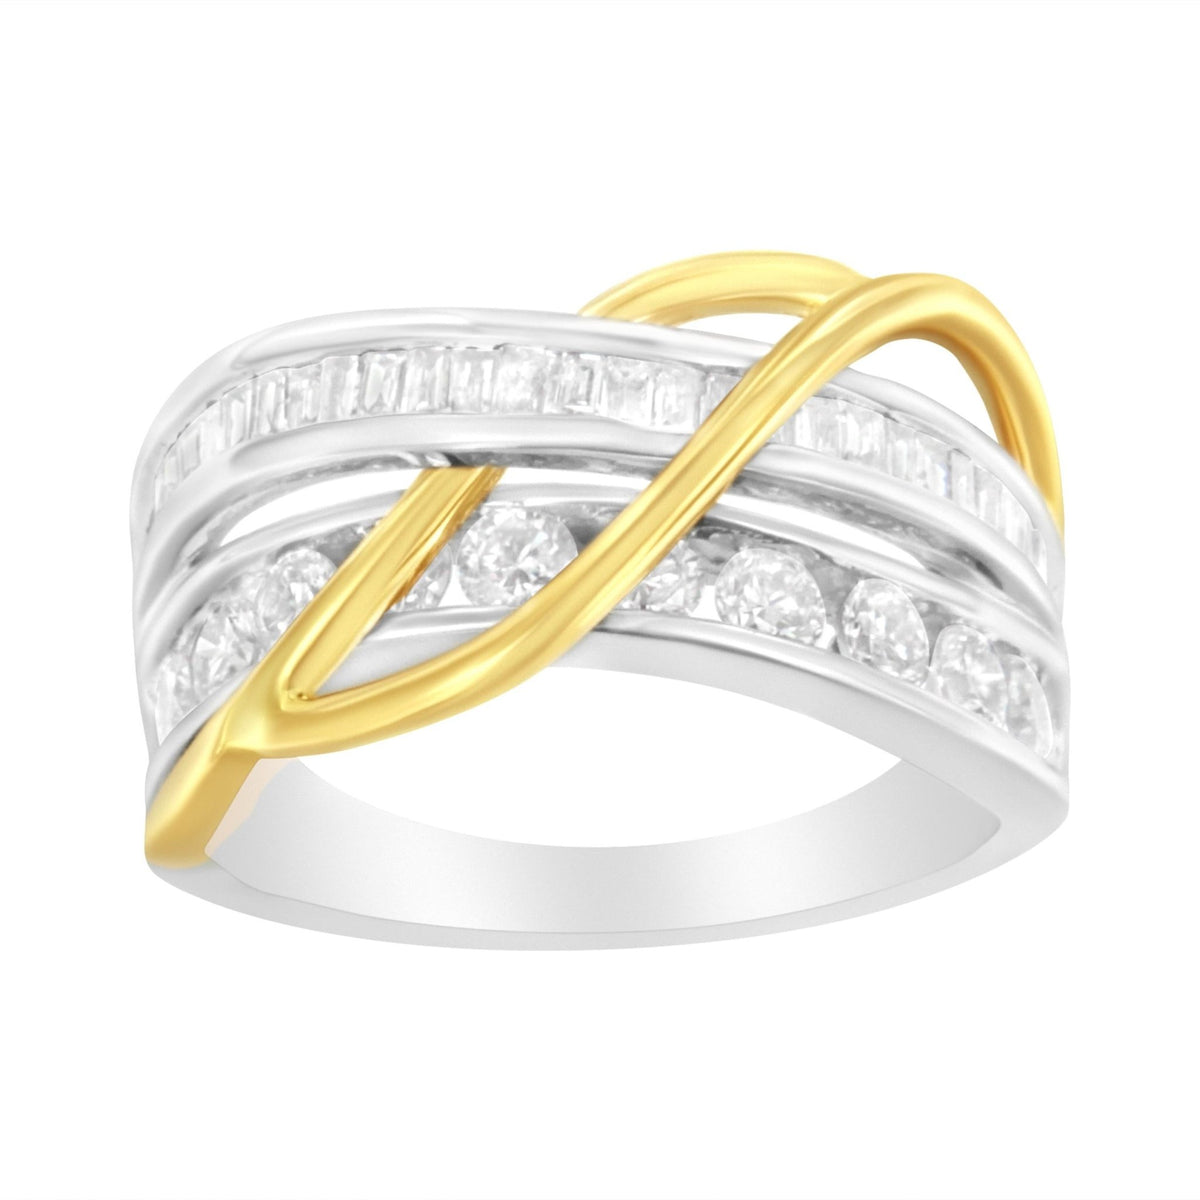 10K White and Yellow Gold 1 1/10 cttw Channel-Set Diamond Bypass Band Ring (J Color, I3 Clarity) – Size 7 - LinkagejewelrydesignLinkagejewelrydesign